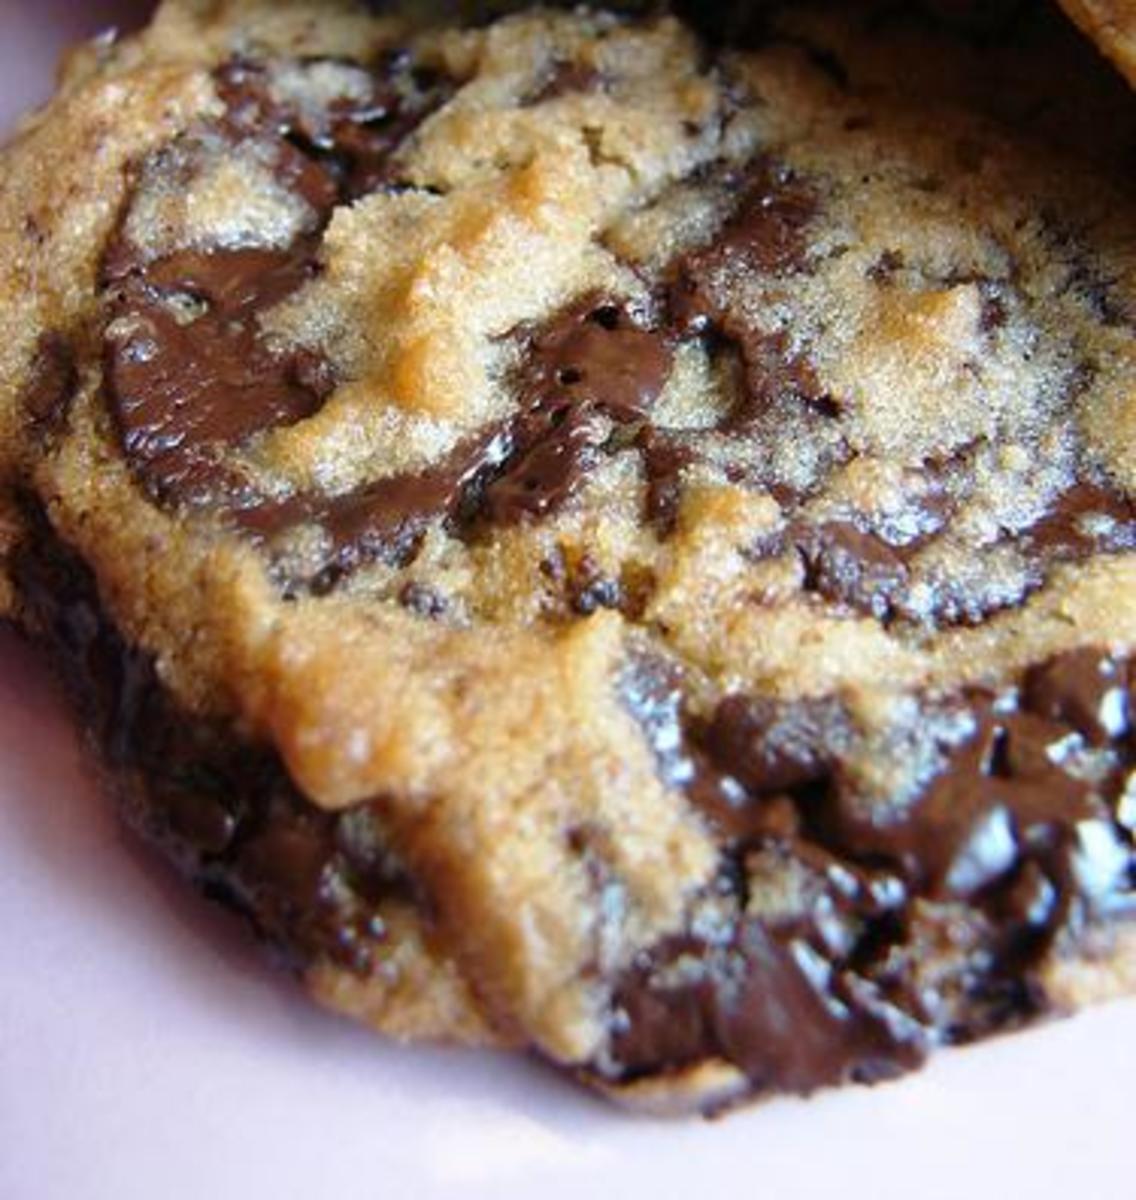 Why not make these delicious chocolate chip cookies now? I promise you'll be glad you did!